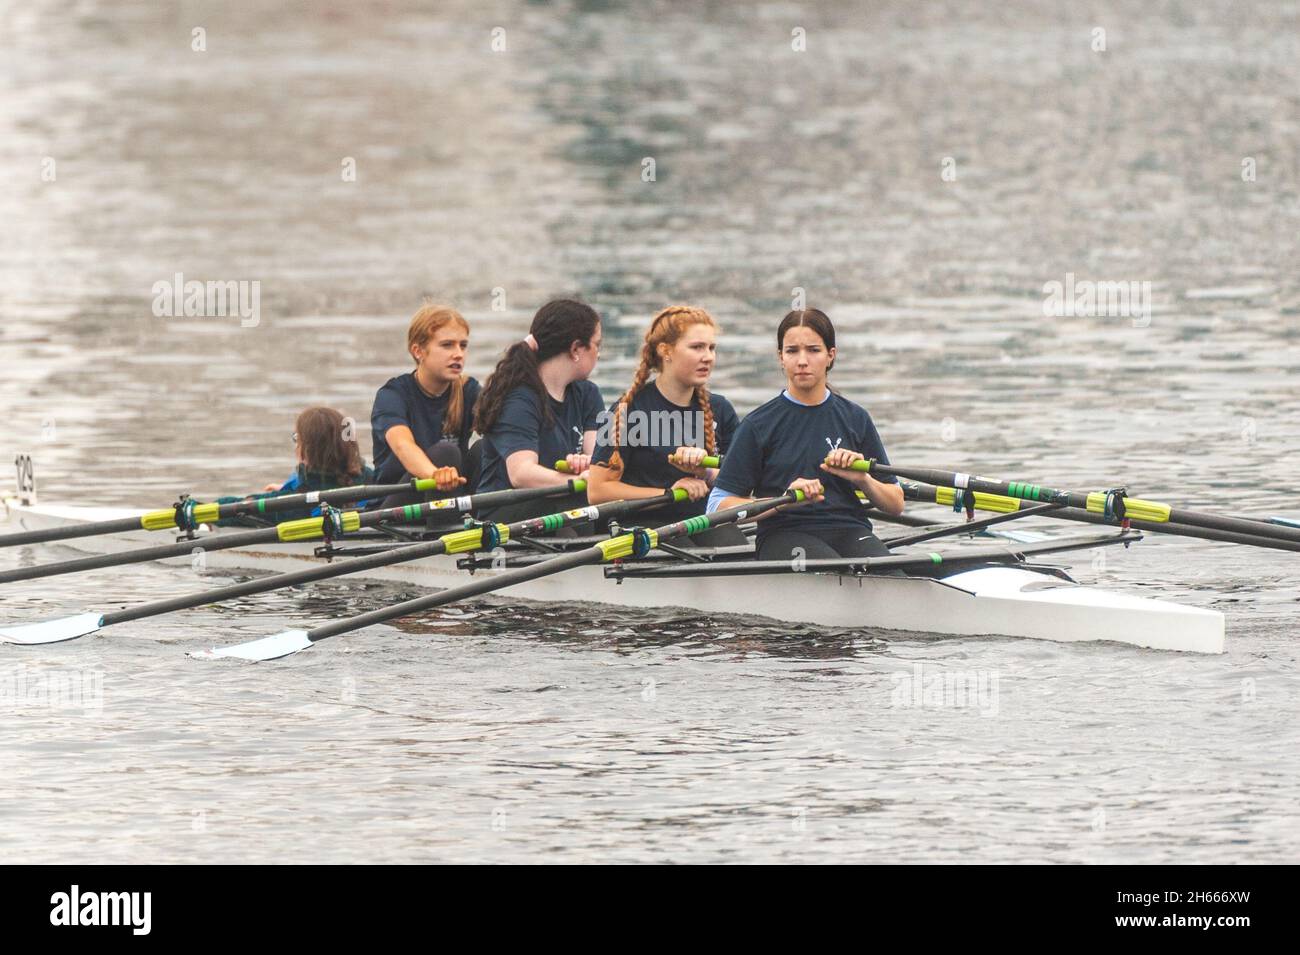 Cork, Ireland. 13th Nov, 2021. Rowers from clubs around County Cork descended on Cork city today for time trials called 'Skibbereen Head of the River'. Crews rowed from Cork city to Blackrock Rowing Club, with the fastest taking the titles in various categories. Credit: AG News/Alamy Live News Stock Photo